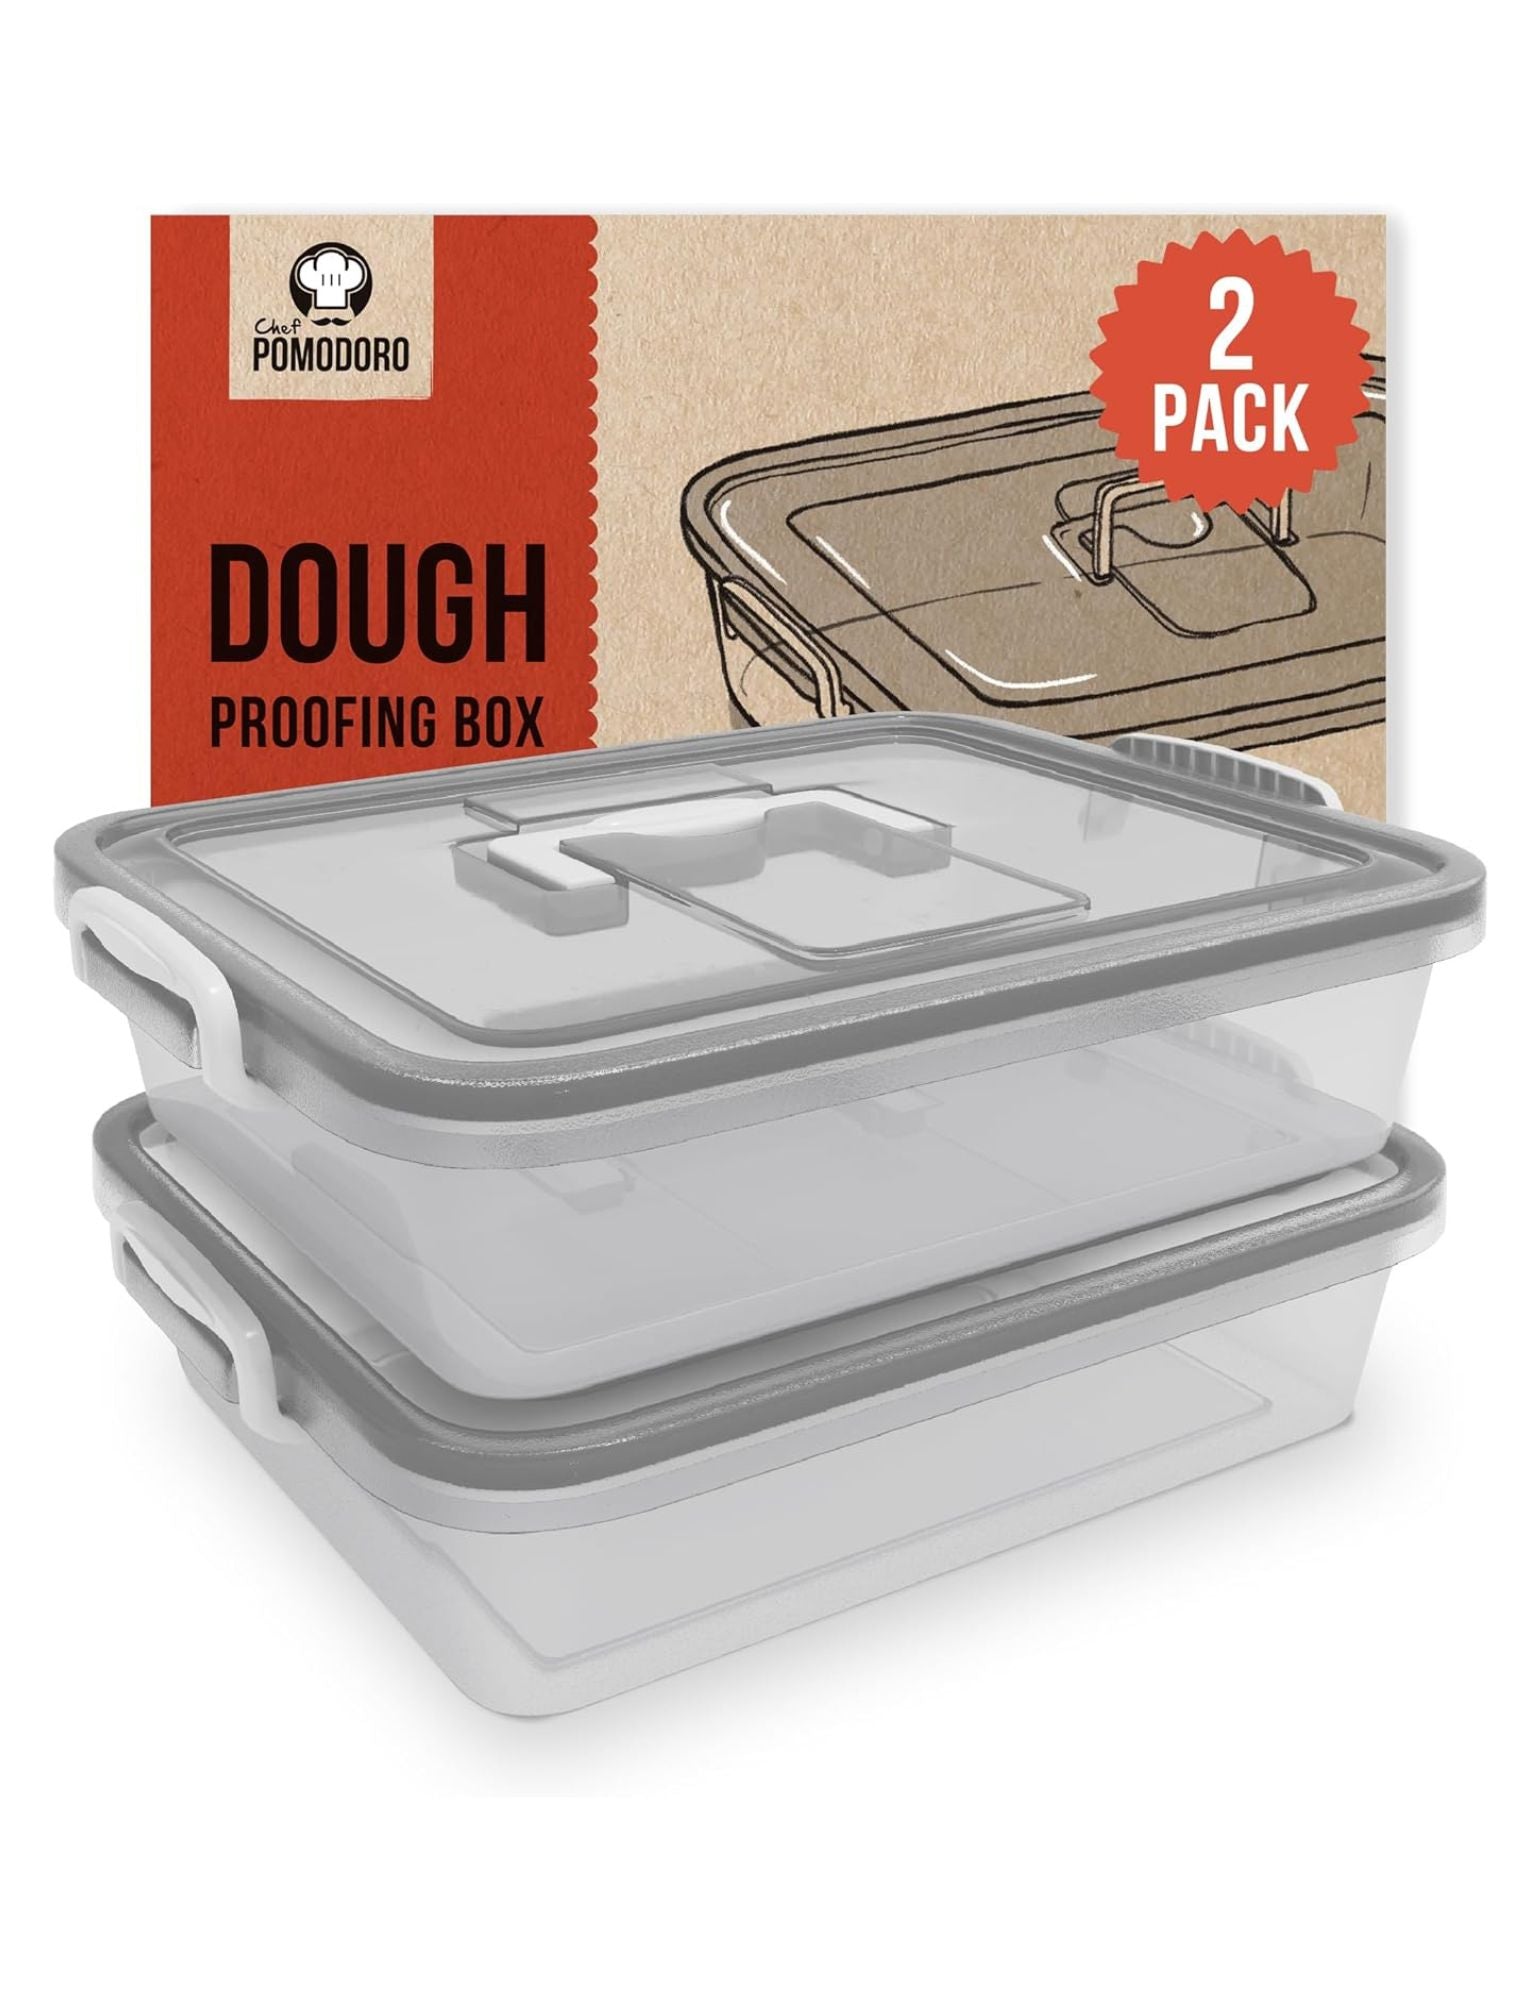 Large Pizza Dough Proofing Box Kit 2-Pack, 17 x 13-Inch, Fits 6-8 Dough Balls (Grey)